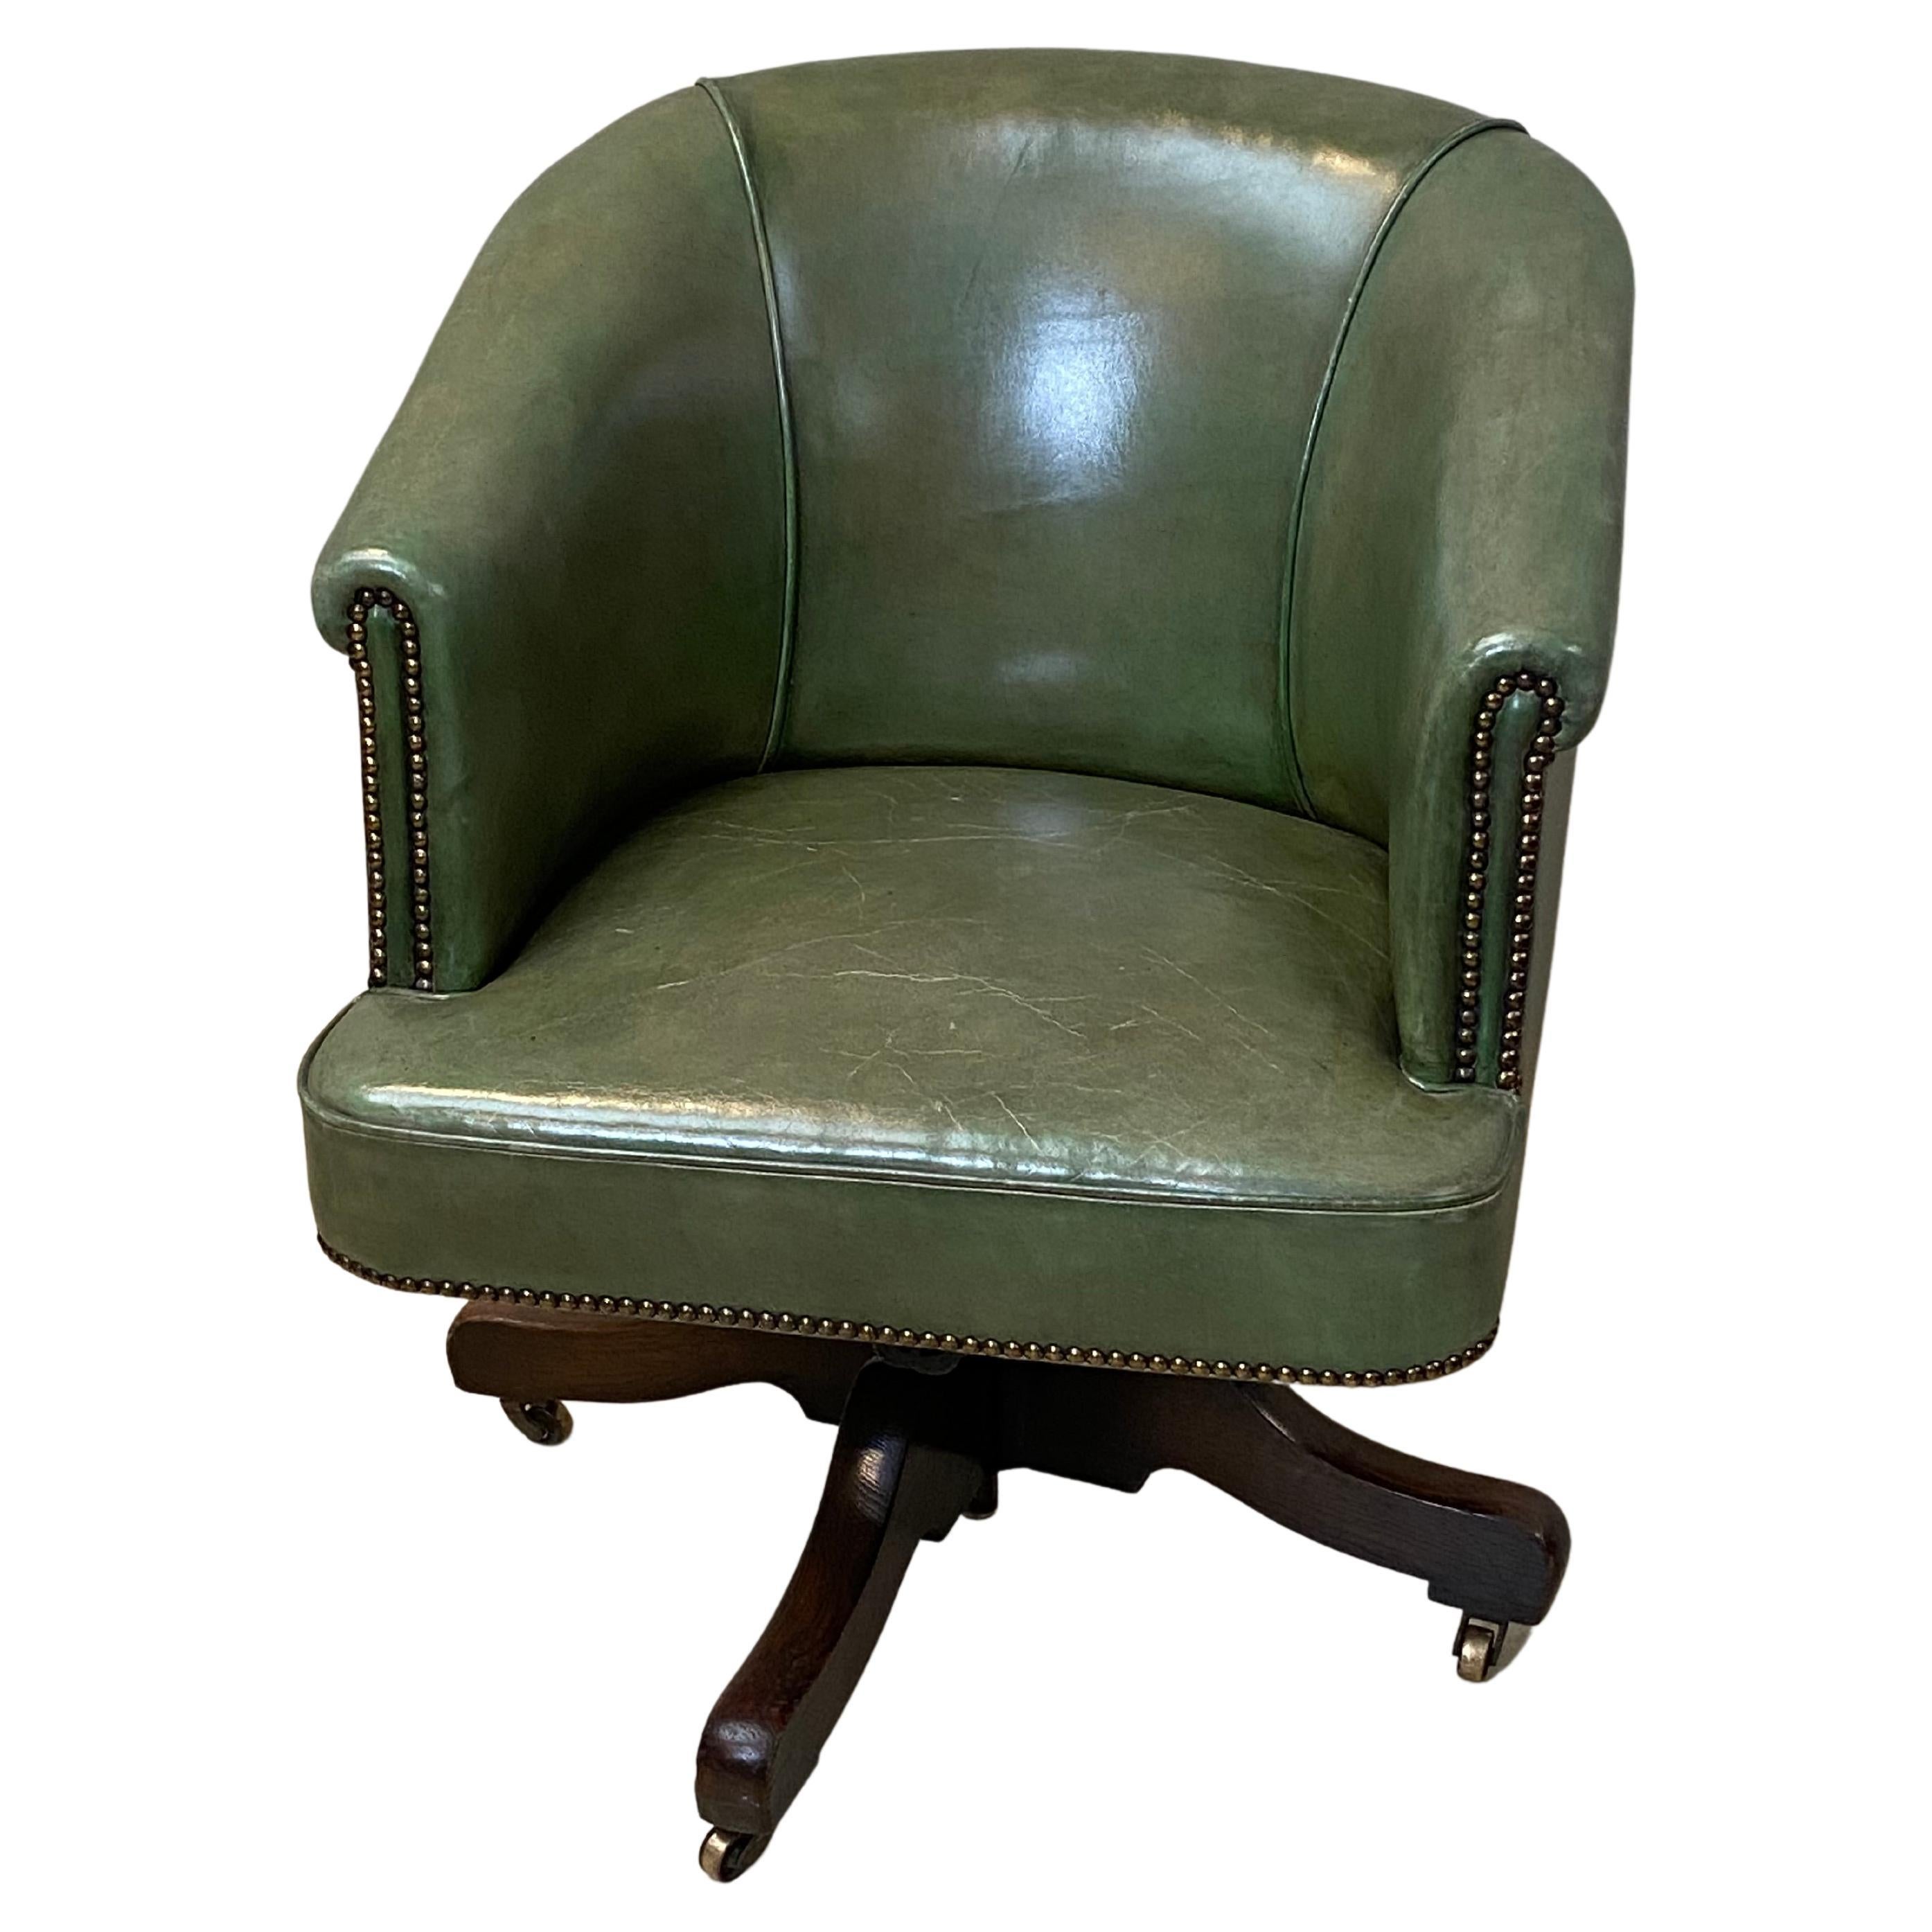 Victorian Chesterfield Office chair in green leather, England, 1860s.